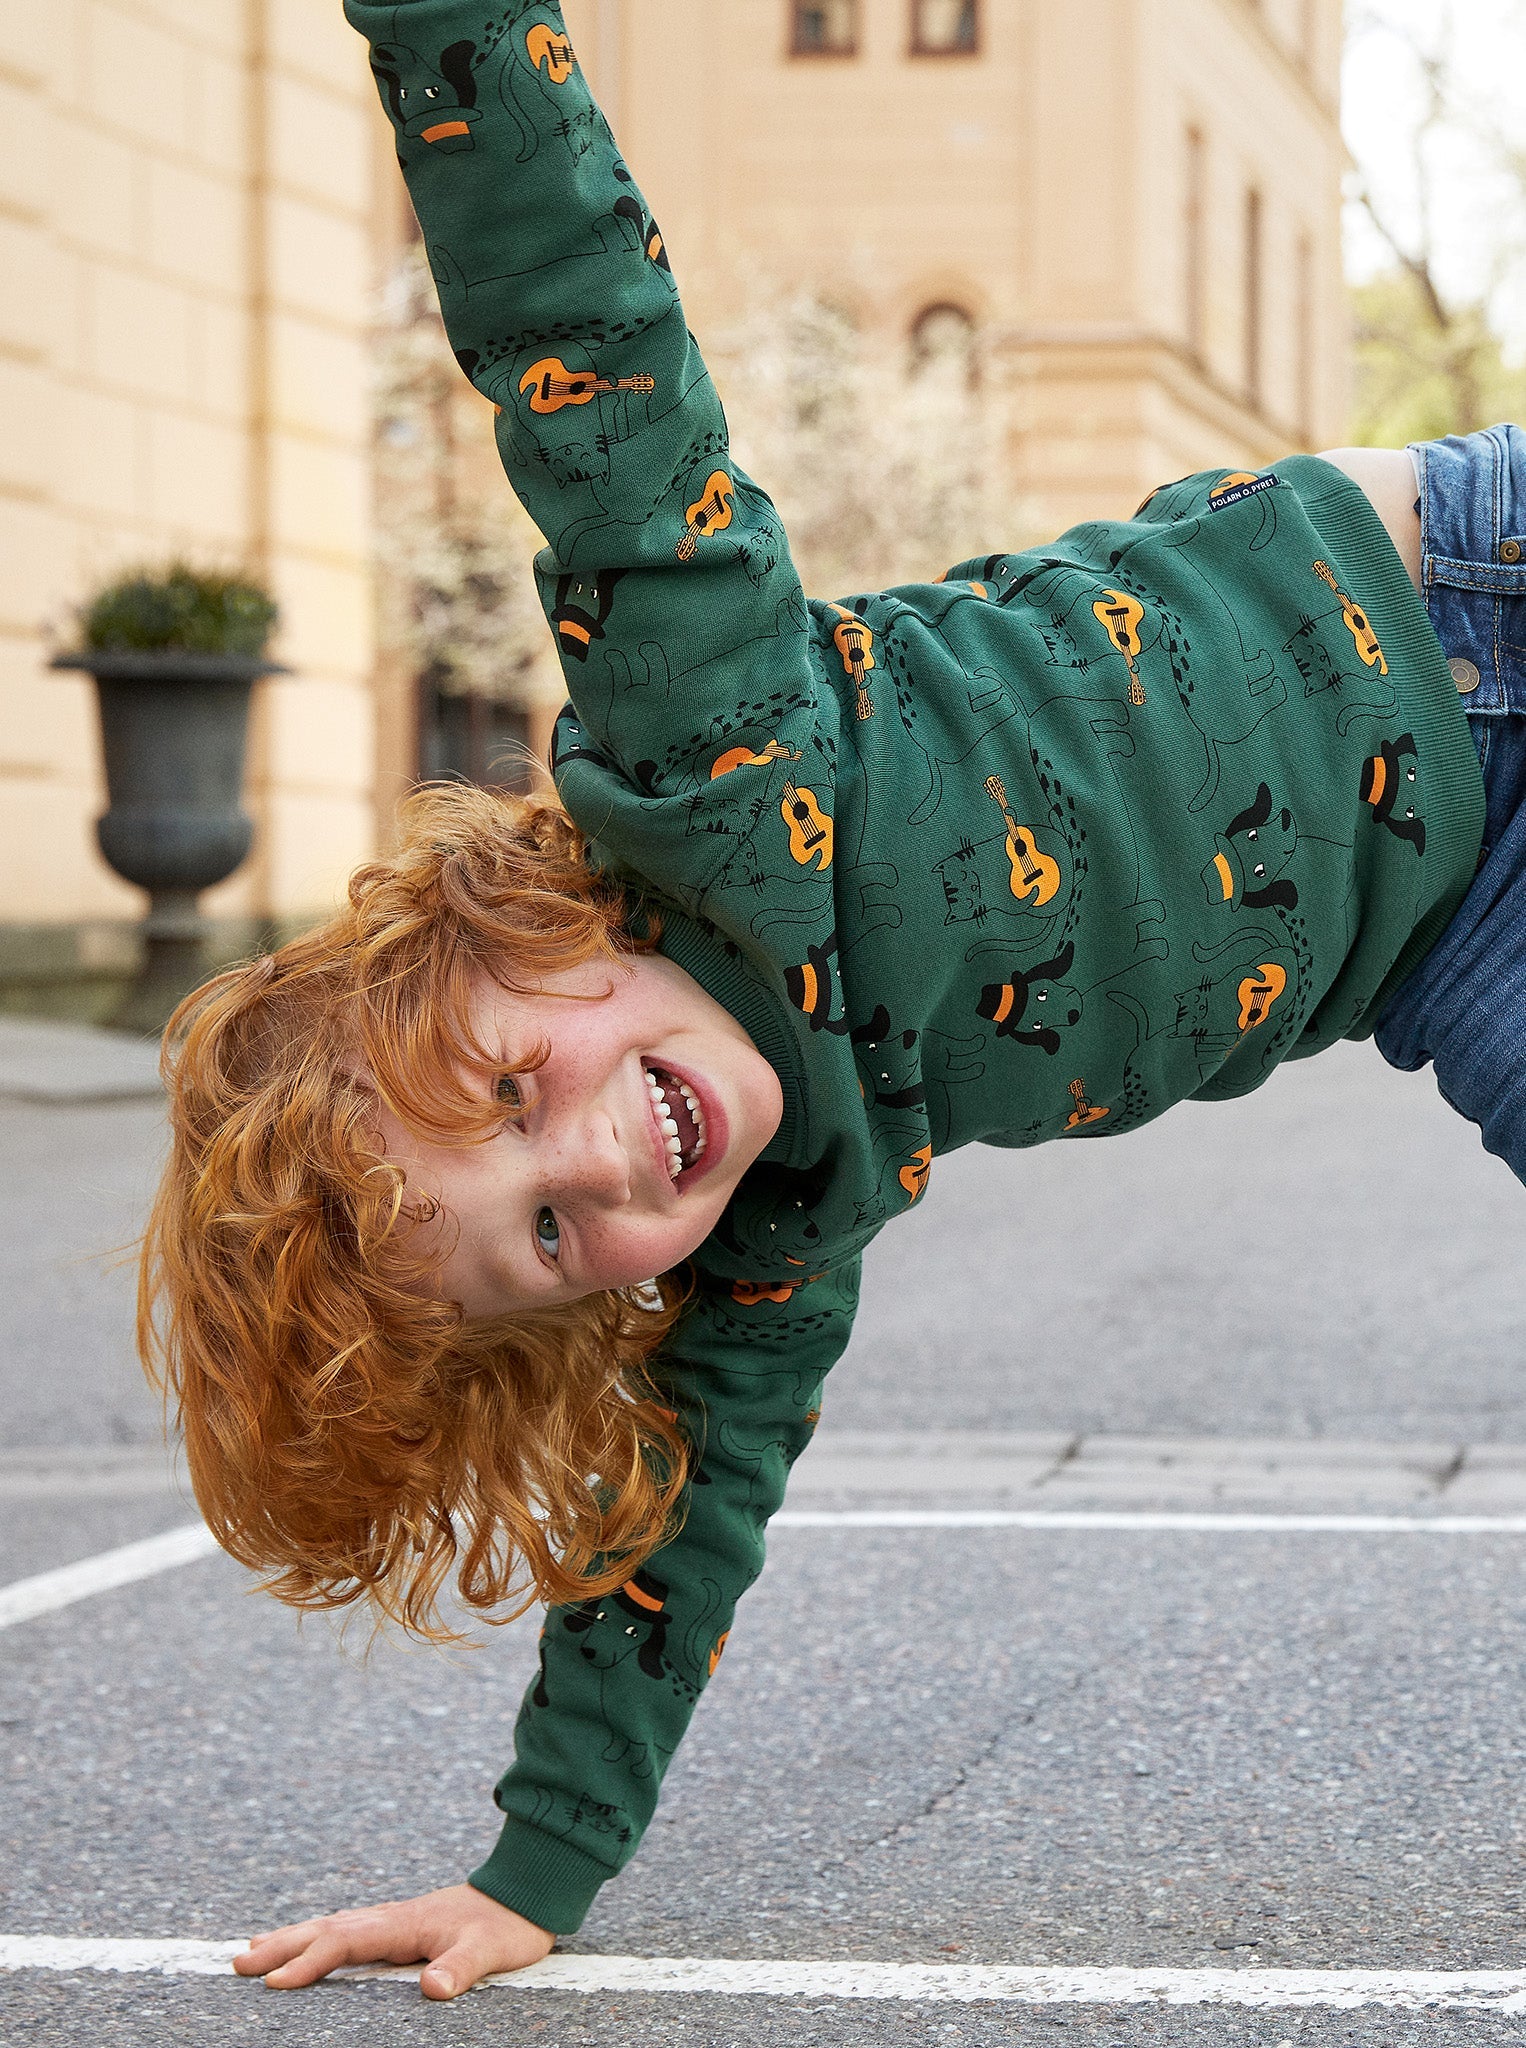 Organic Cotton Tiger Print Sweatshirt from the Polarn O. Pyret Kidswear collection. Ethically produced kids clothing.